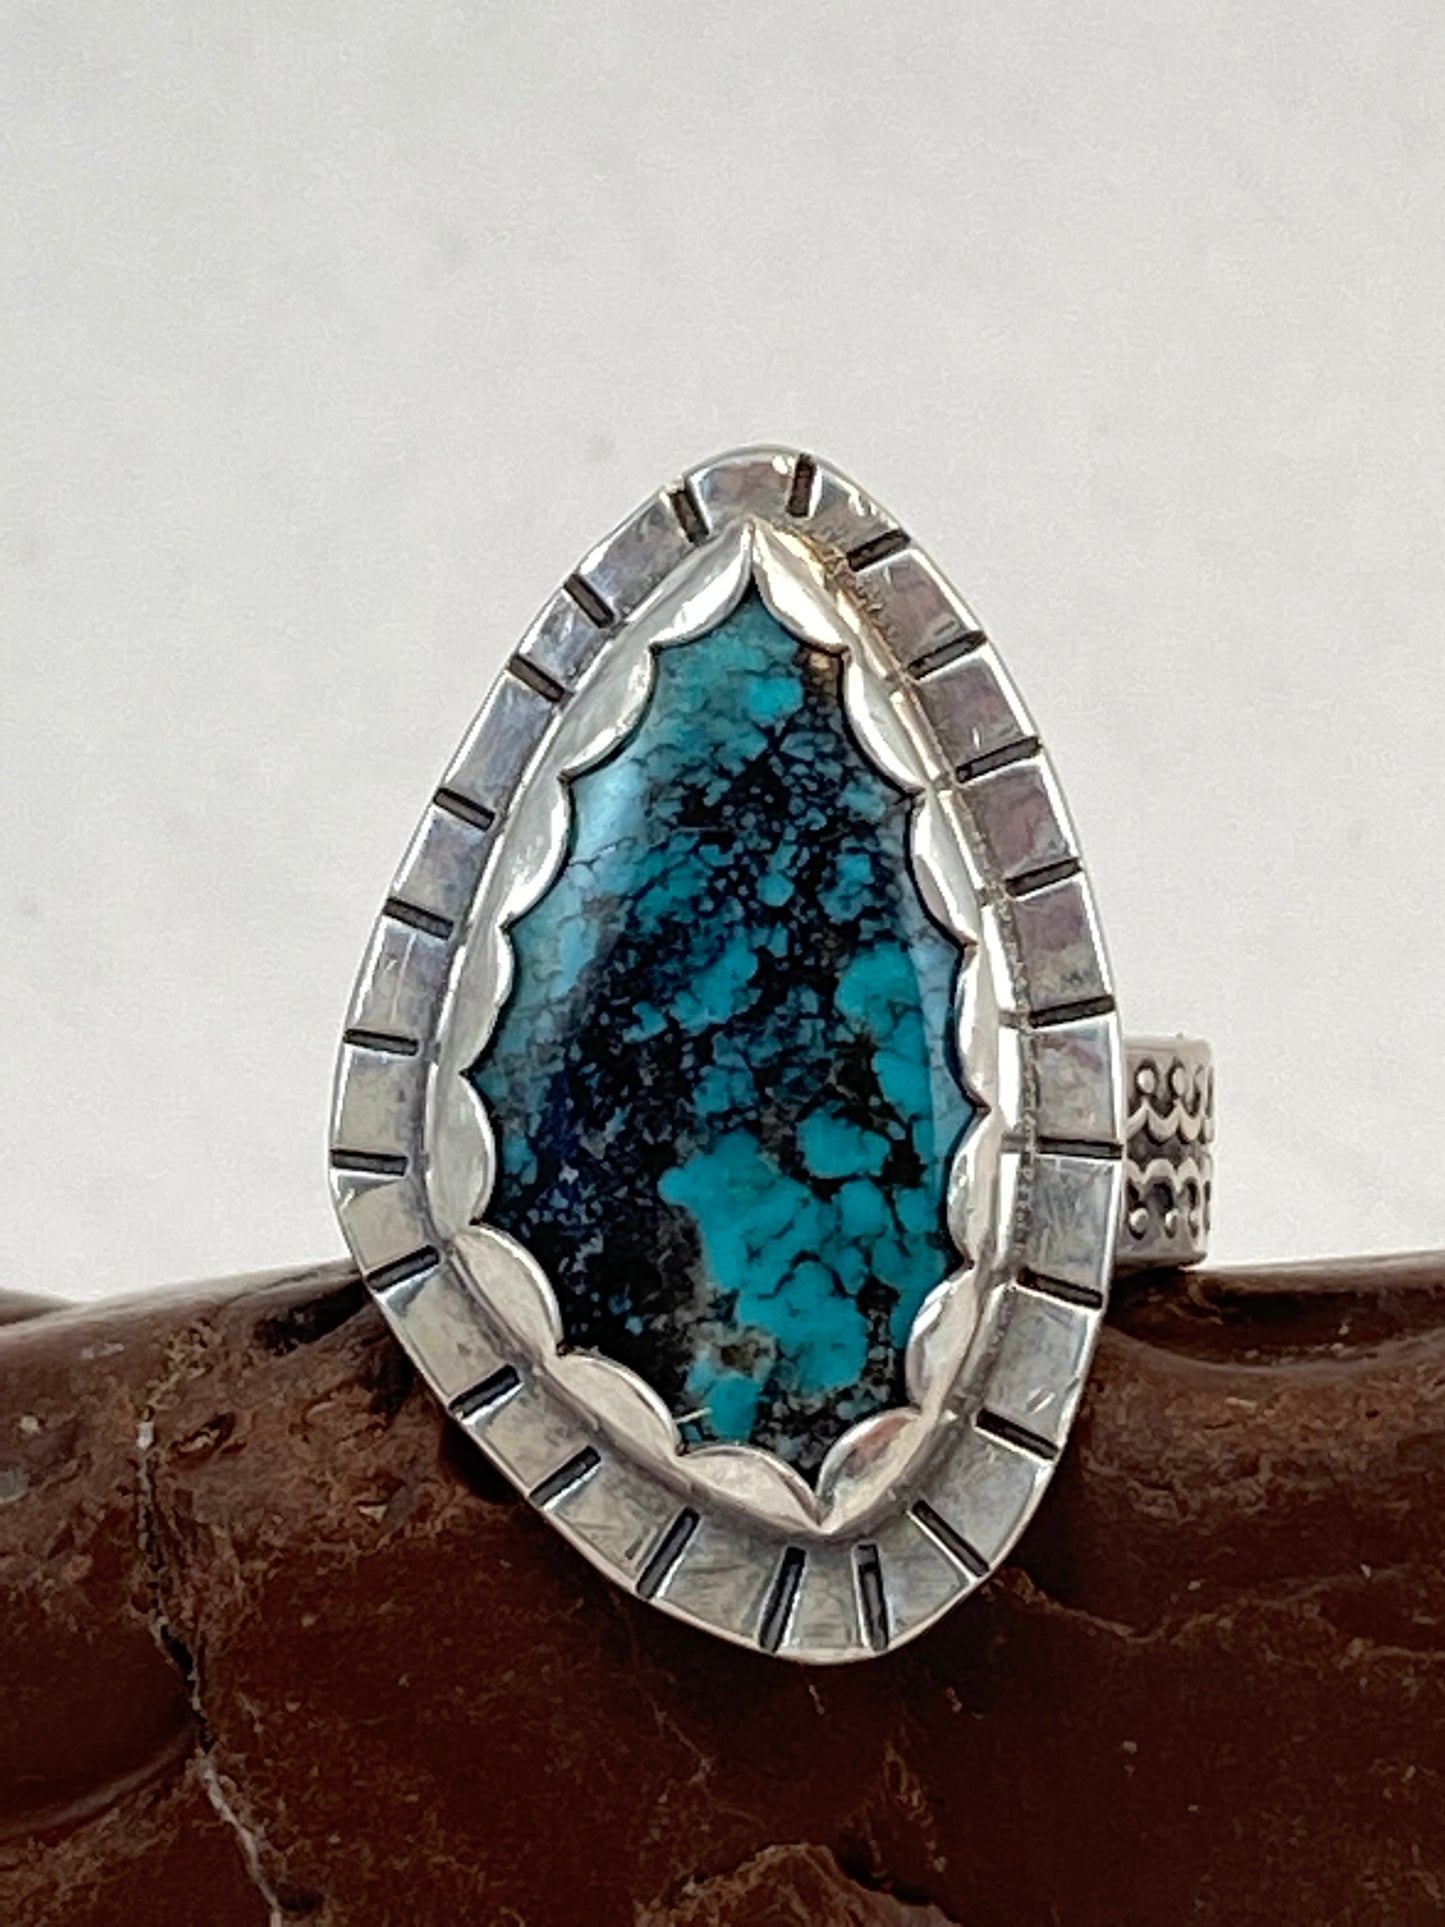 Gorgeous turquoise stone set in scalloped bezel on textured backplate atop beautifully textured ring band